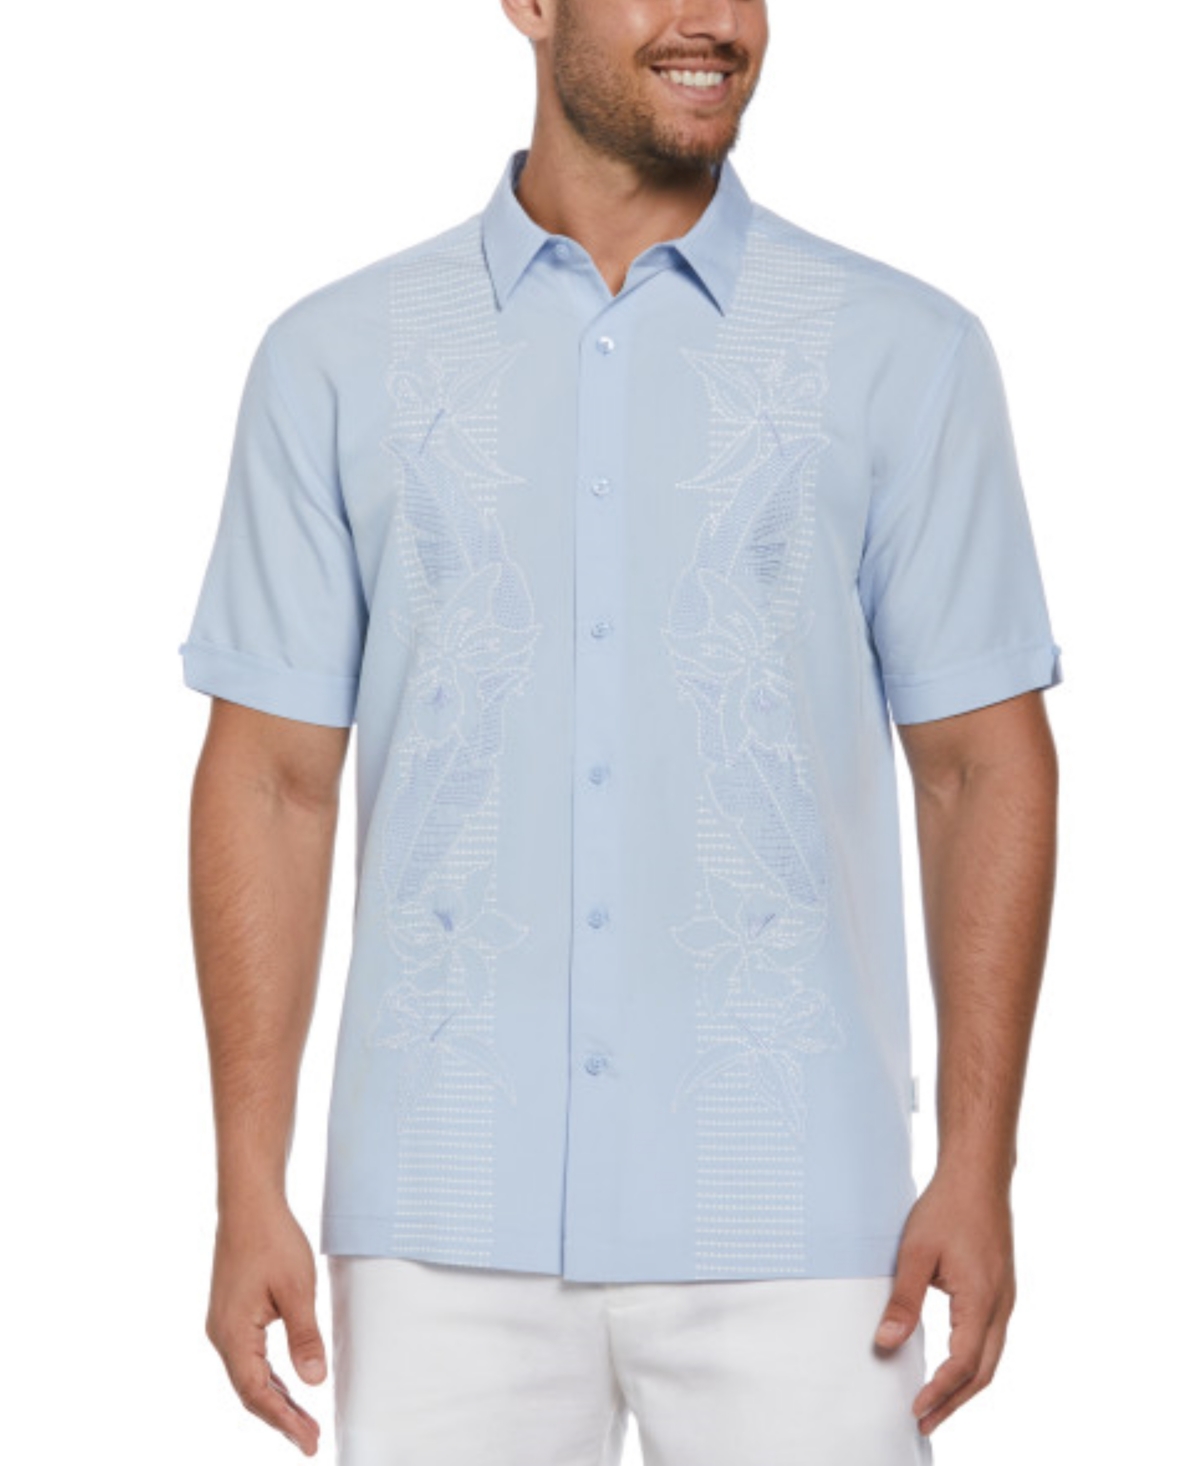 Men's Short Sleeve Button Front Floral Embroidered Panel Shirt - Blue